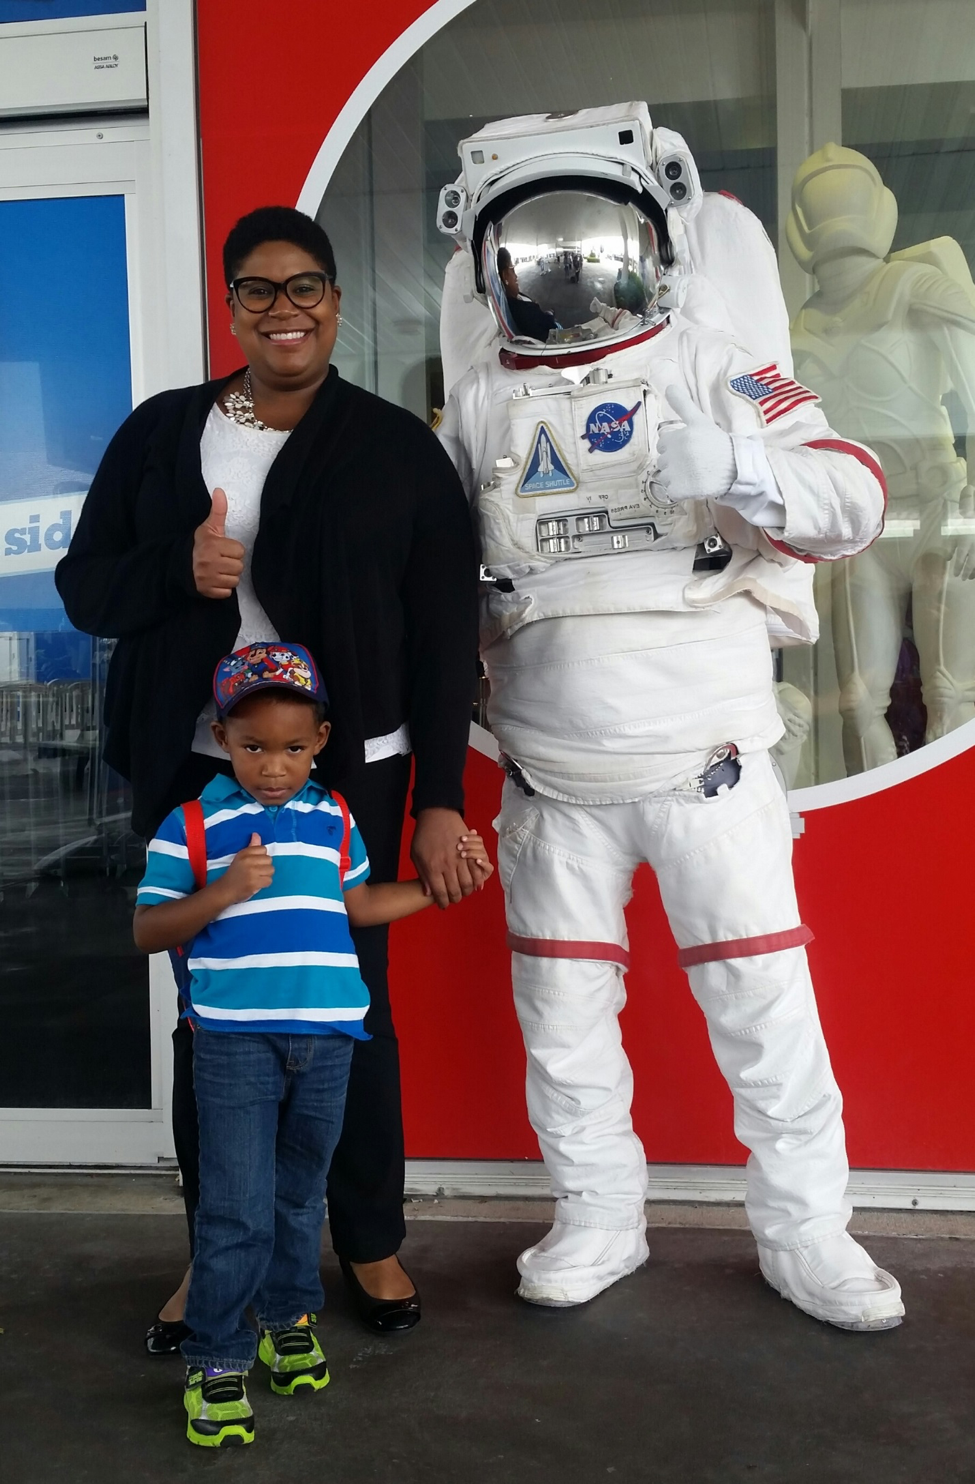 Jamese and son, Jordan, at the Kennedy Space Center in Cape Canaveral, FL.